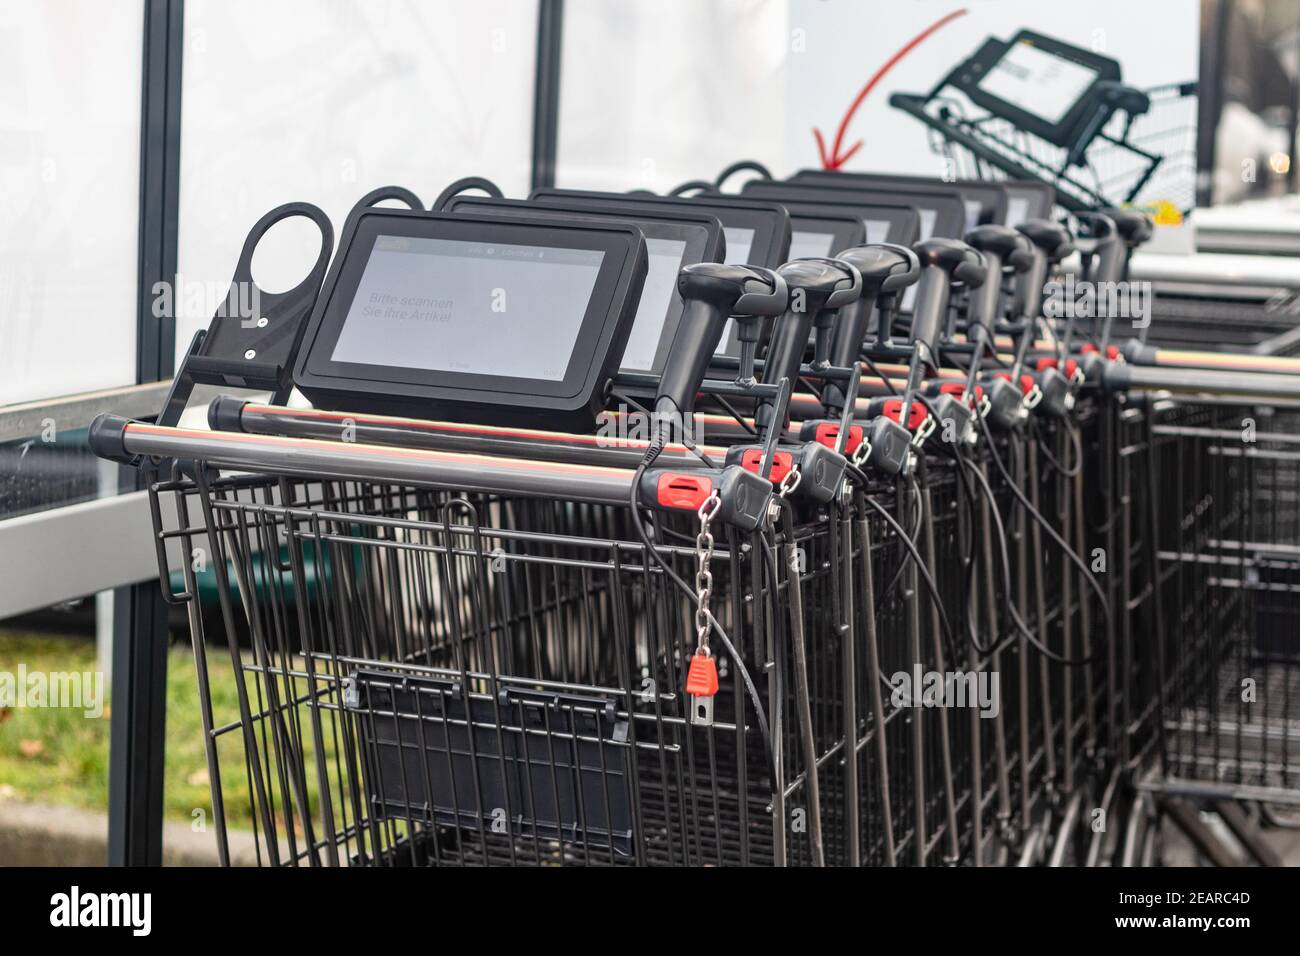 Shopping trolley with scanner system Stock Photo